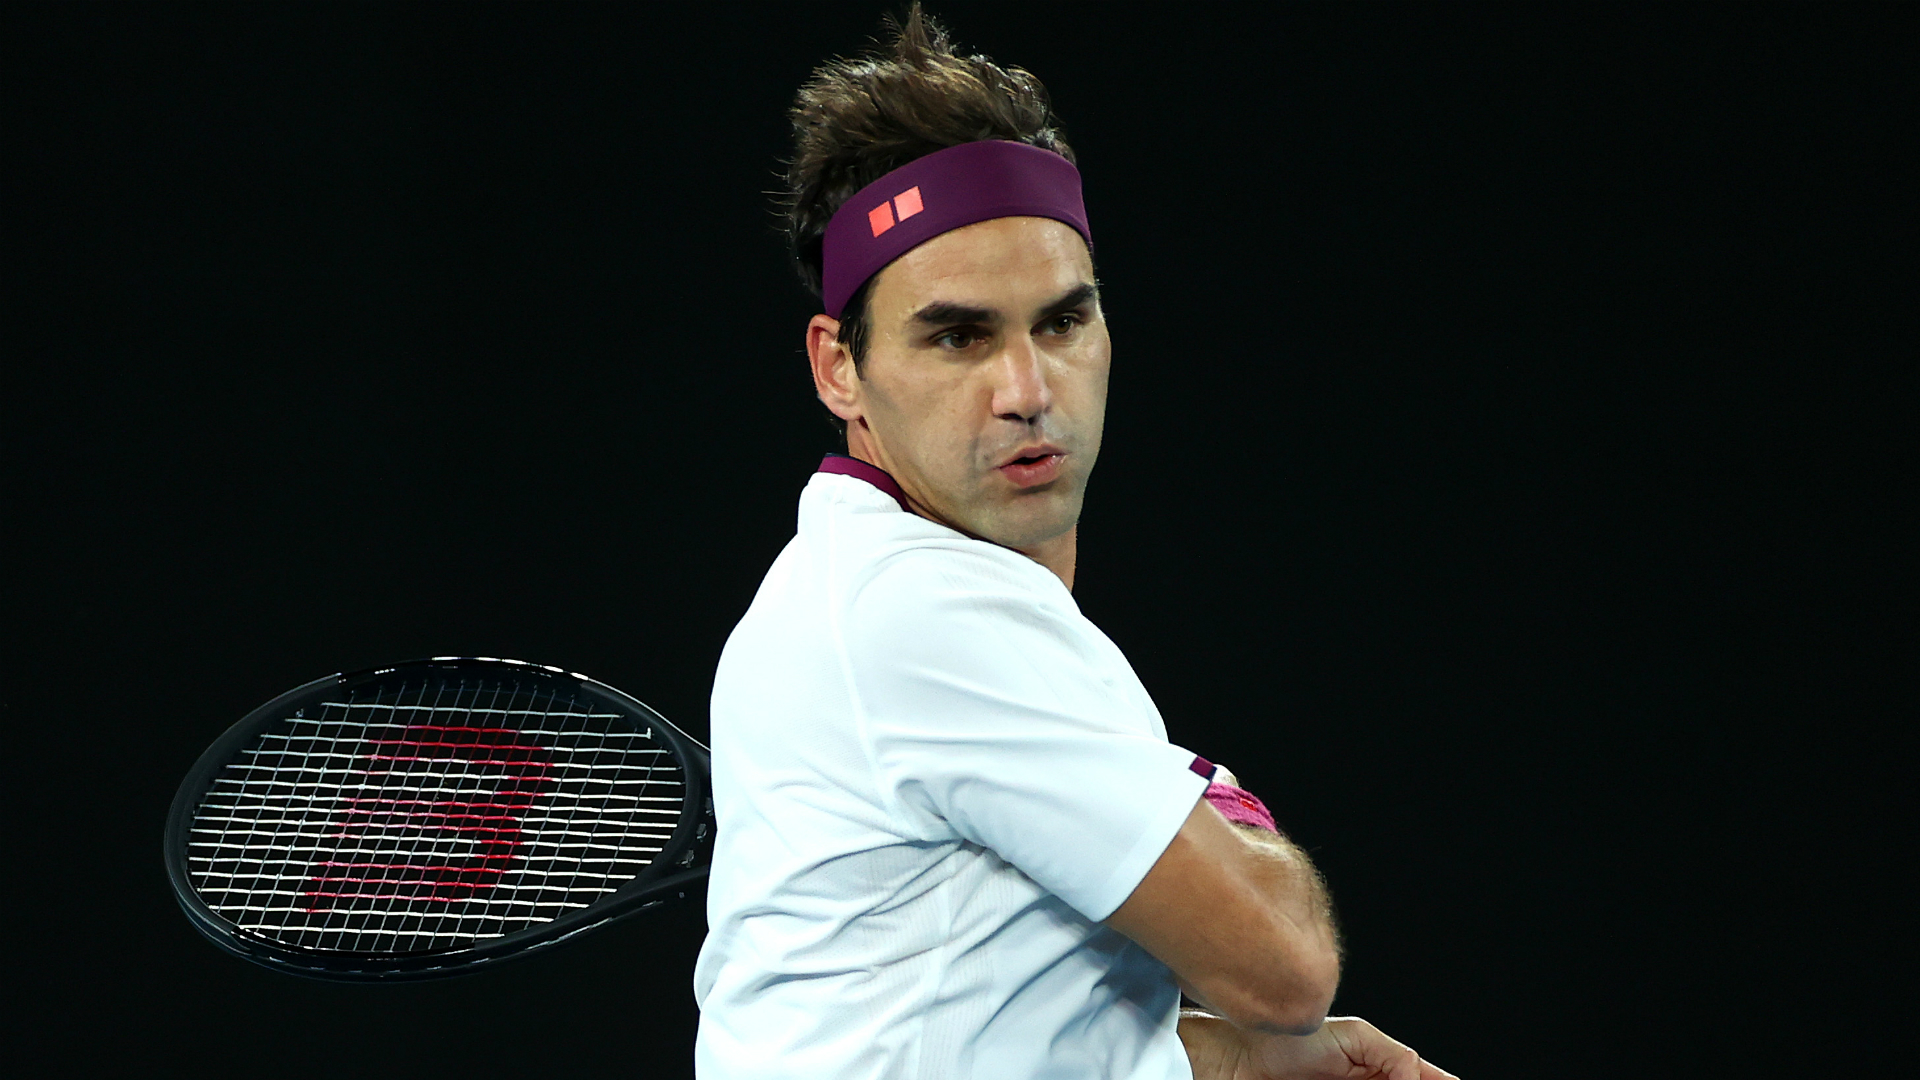 Roger Federer played himself into some impressive form as he defeated Marton Fucsovics in four sets to reach the quarter-finals.